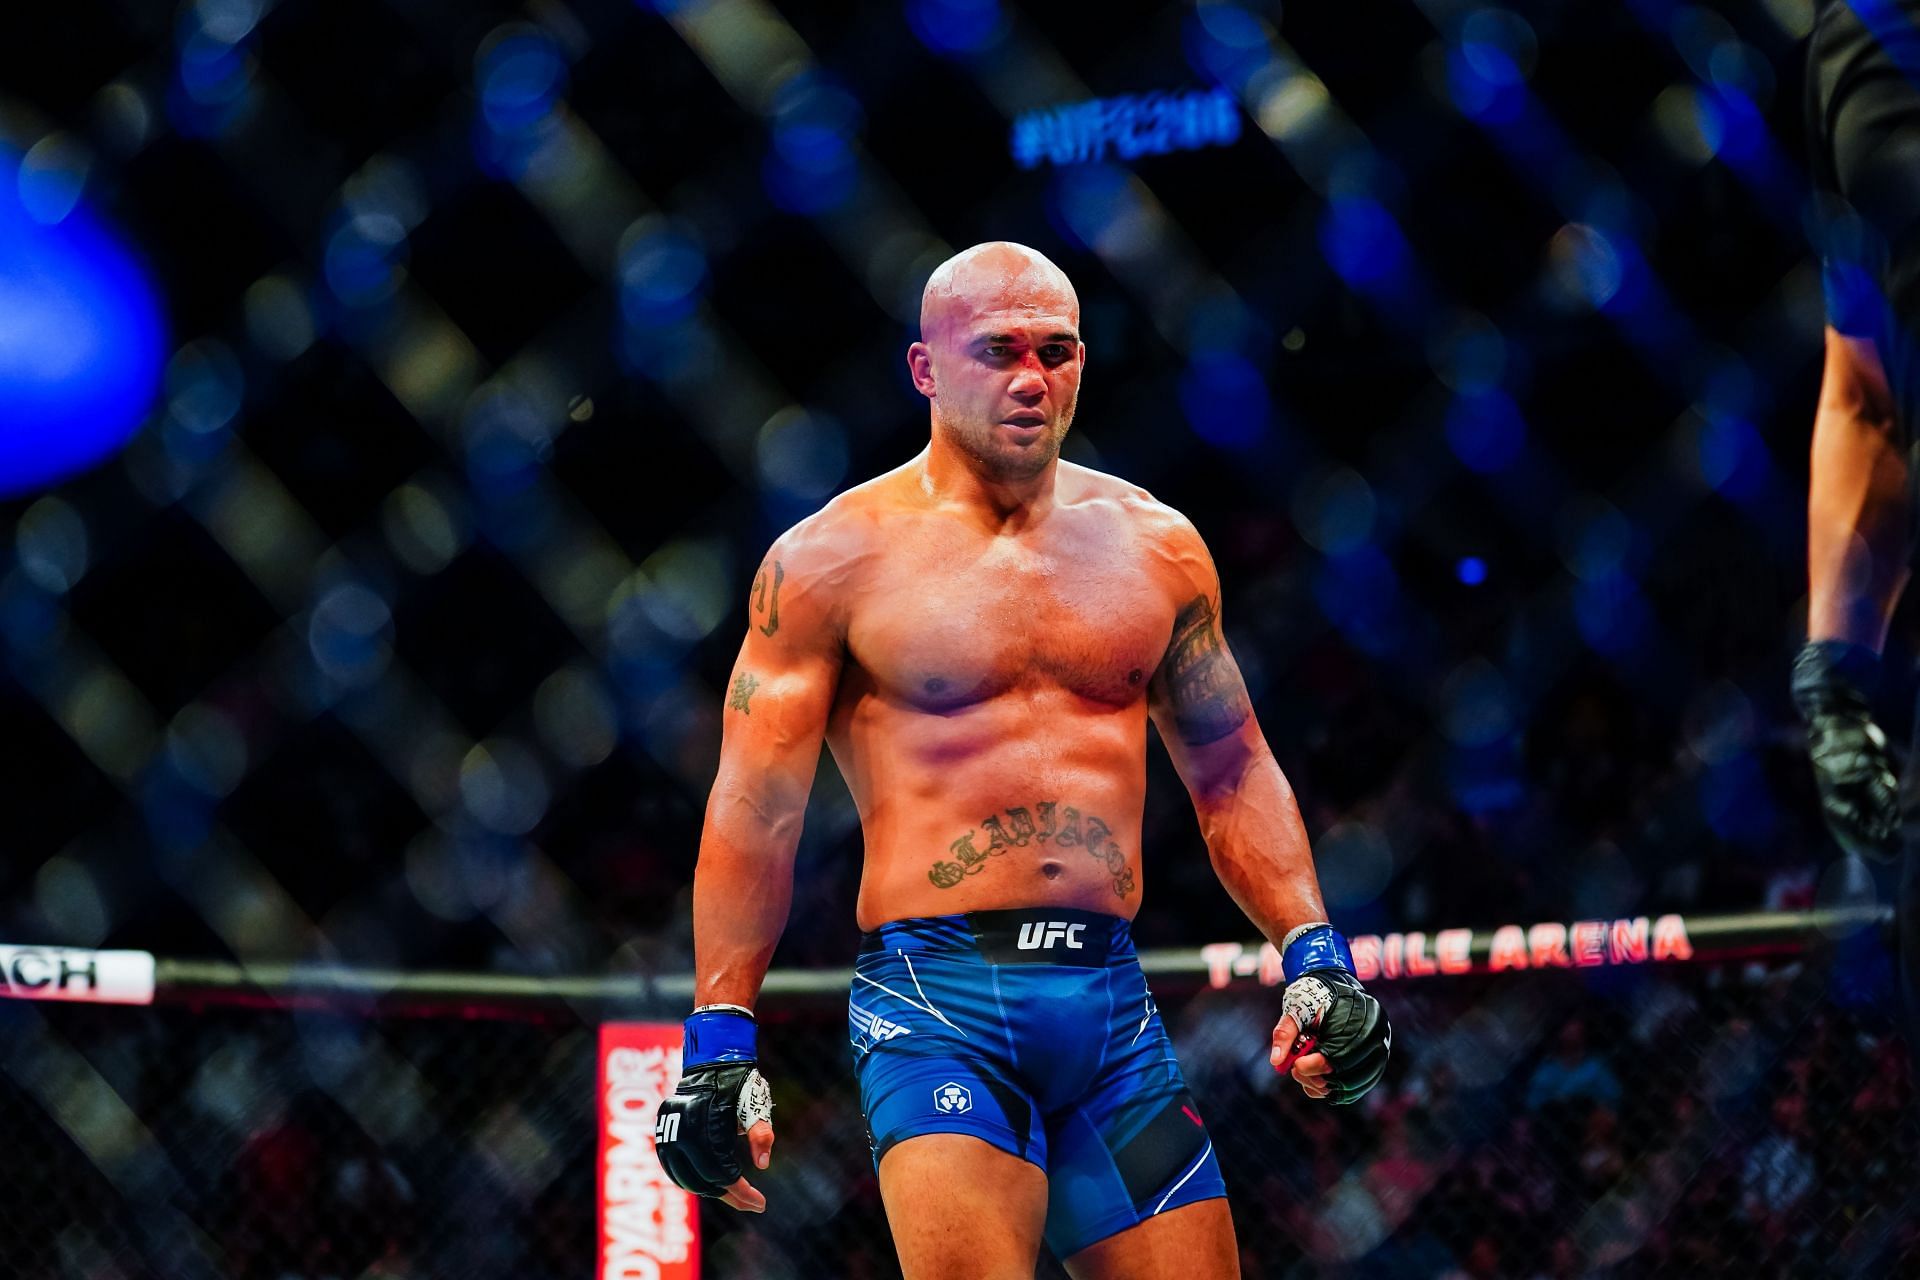 Robbie Lawler has a record of 29-16 (1 NC)